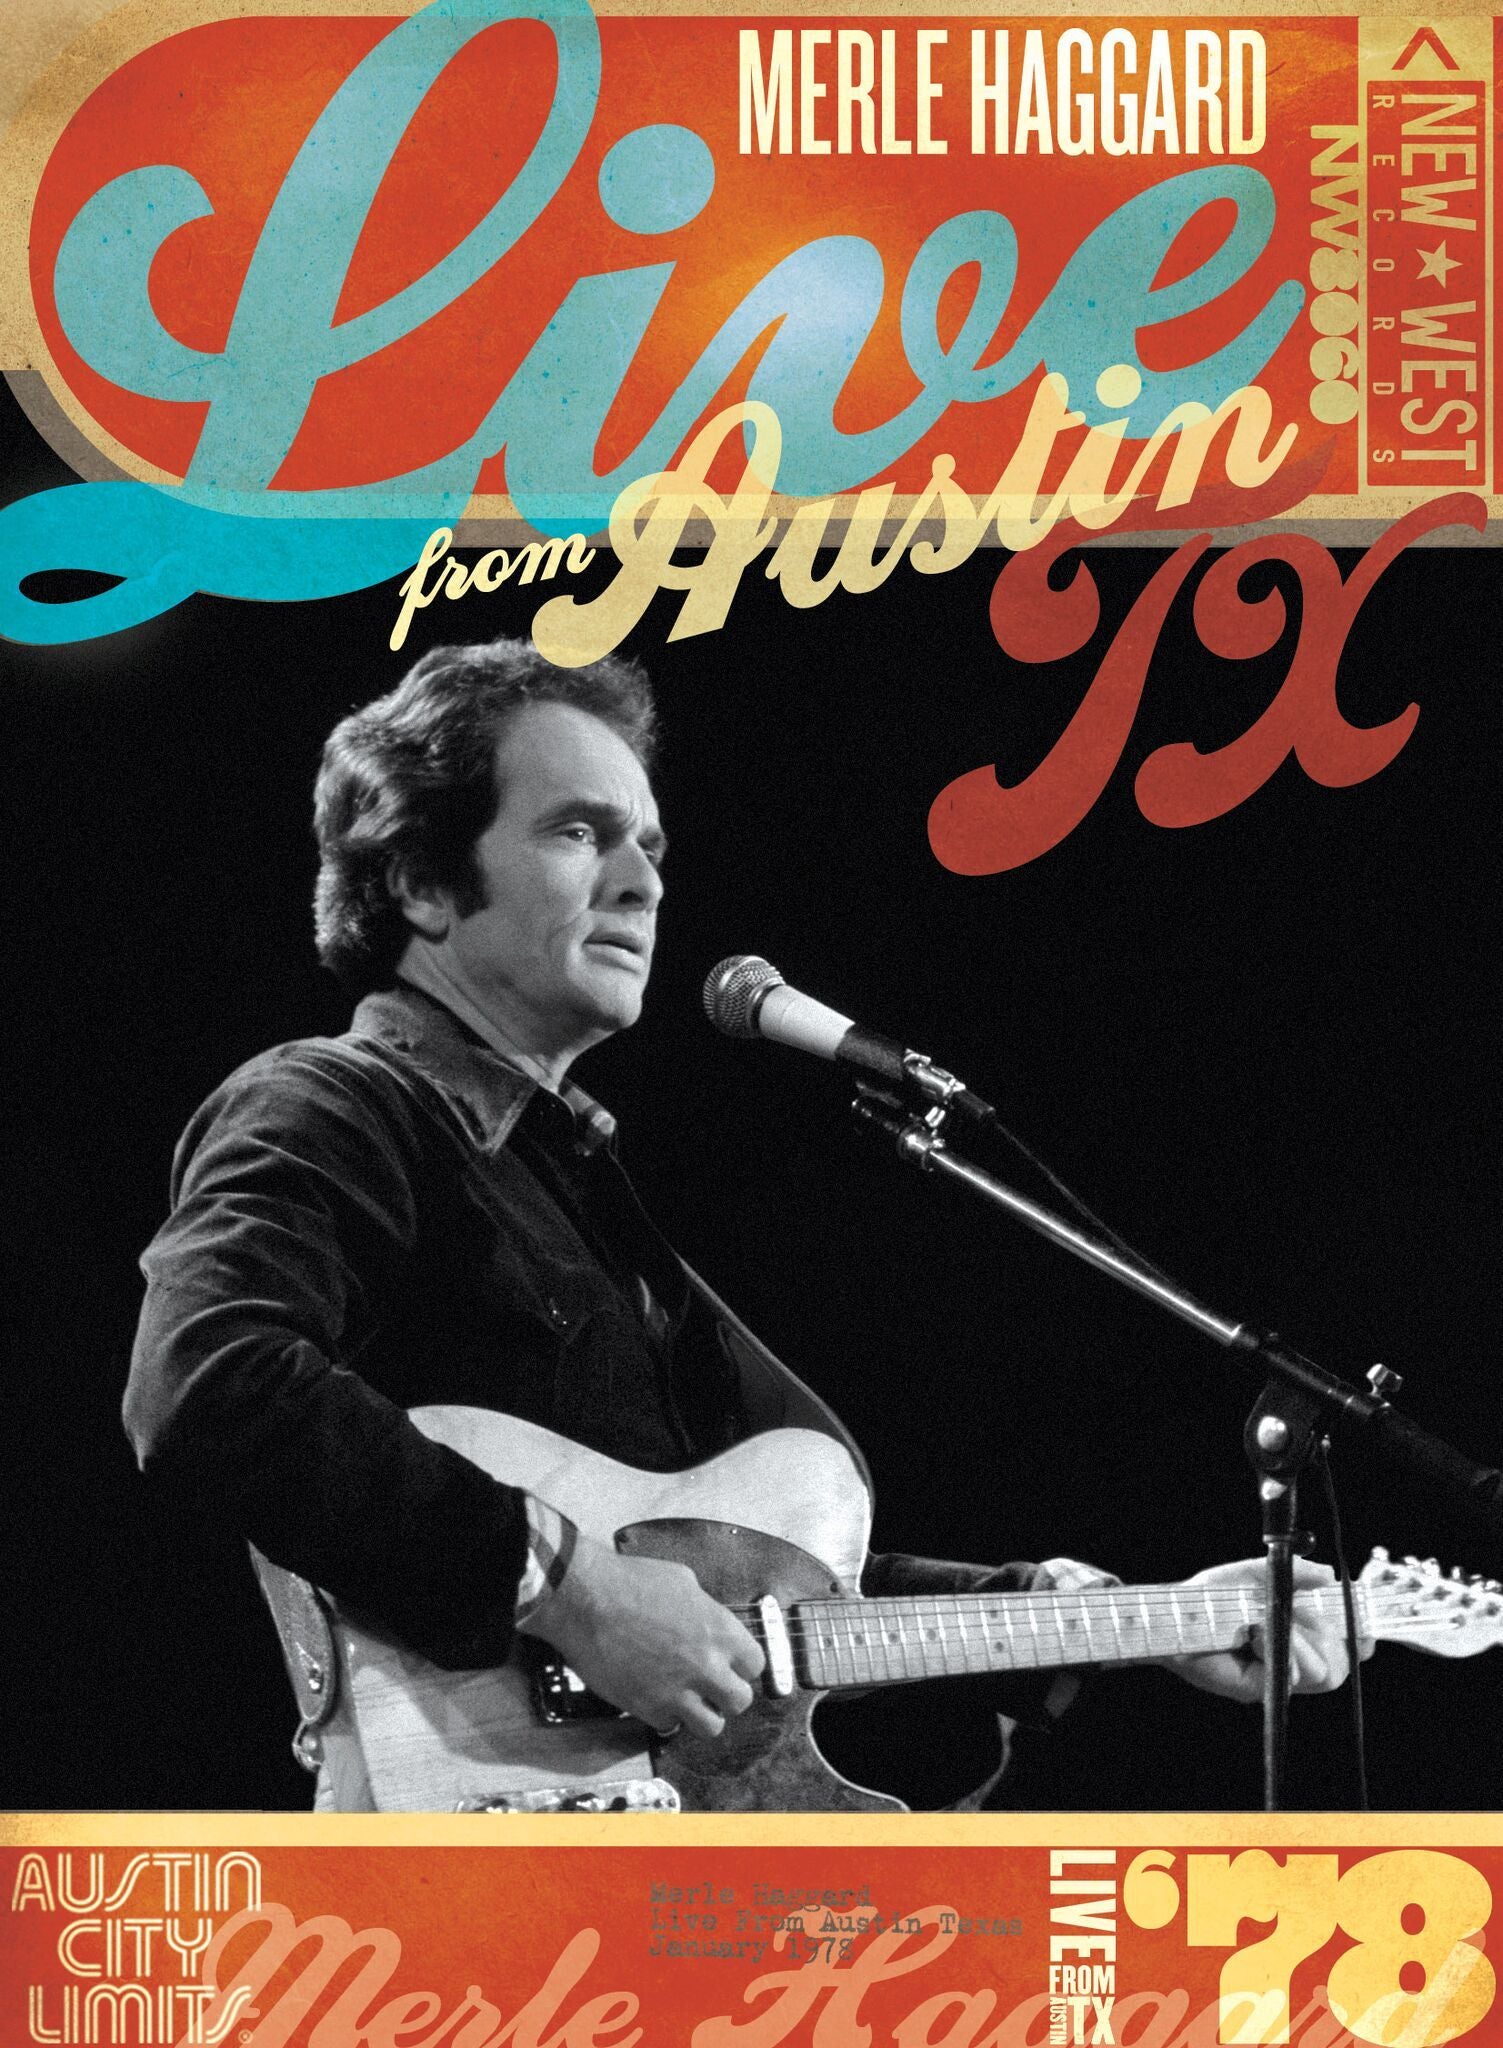 Merle Haggard '78 - Live From Austin, TX [DVD]